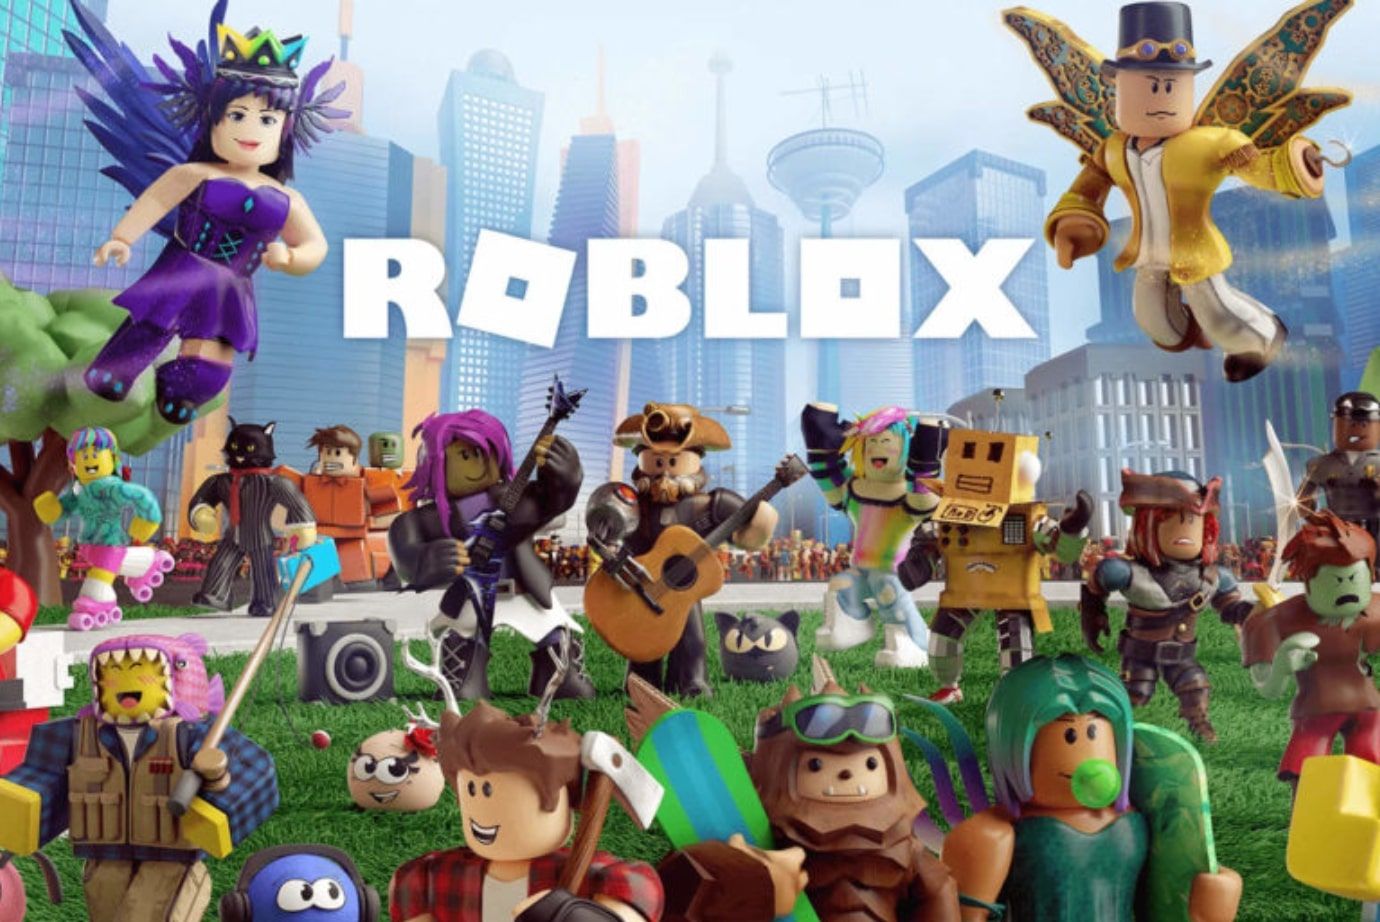 W0w8tkksth7jnm - codes for roblox xbox one